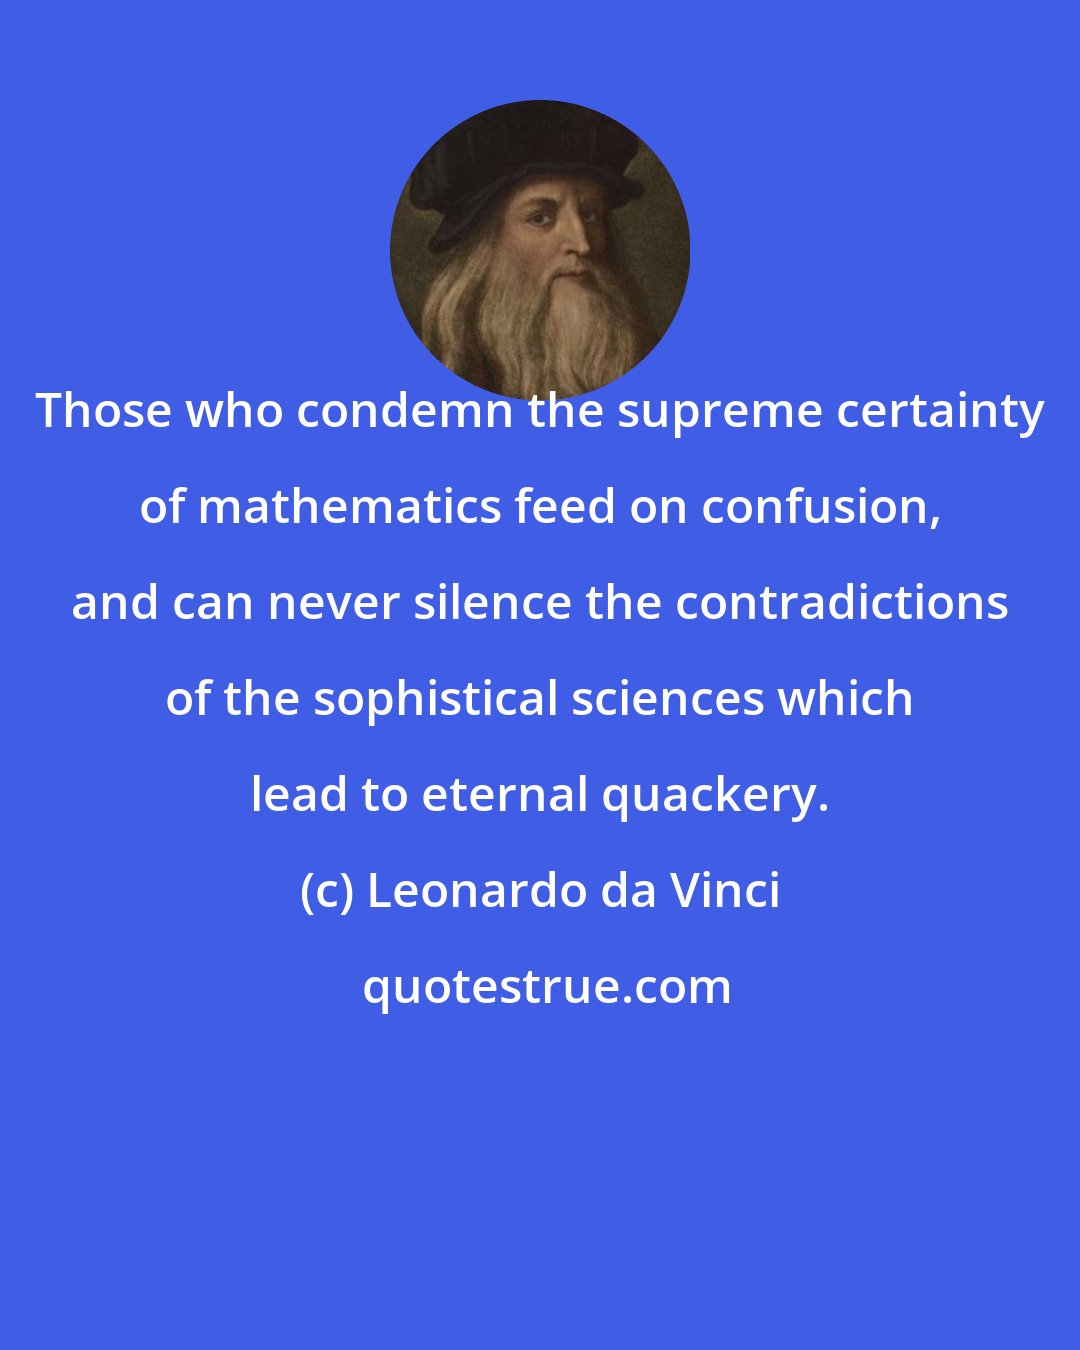 Leonardo da Vinci: Those who condemn the supreme certainty of mathematics feed on confusion, and can never silence the contradictions of the sophistical sciences which lead to eternal quackery.